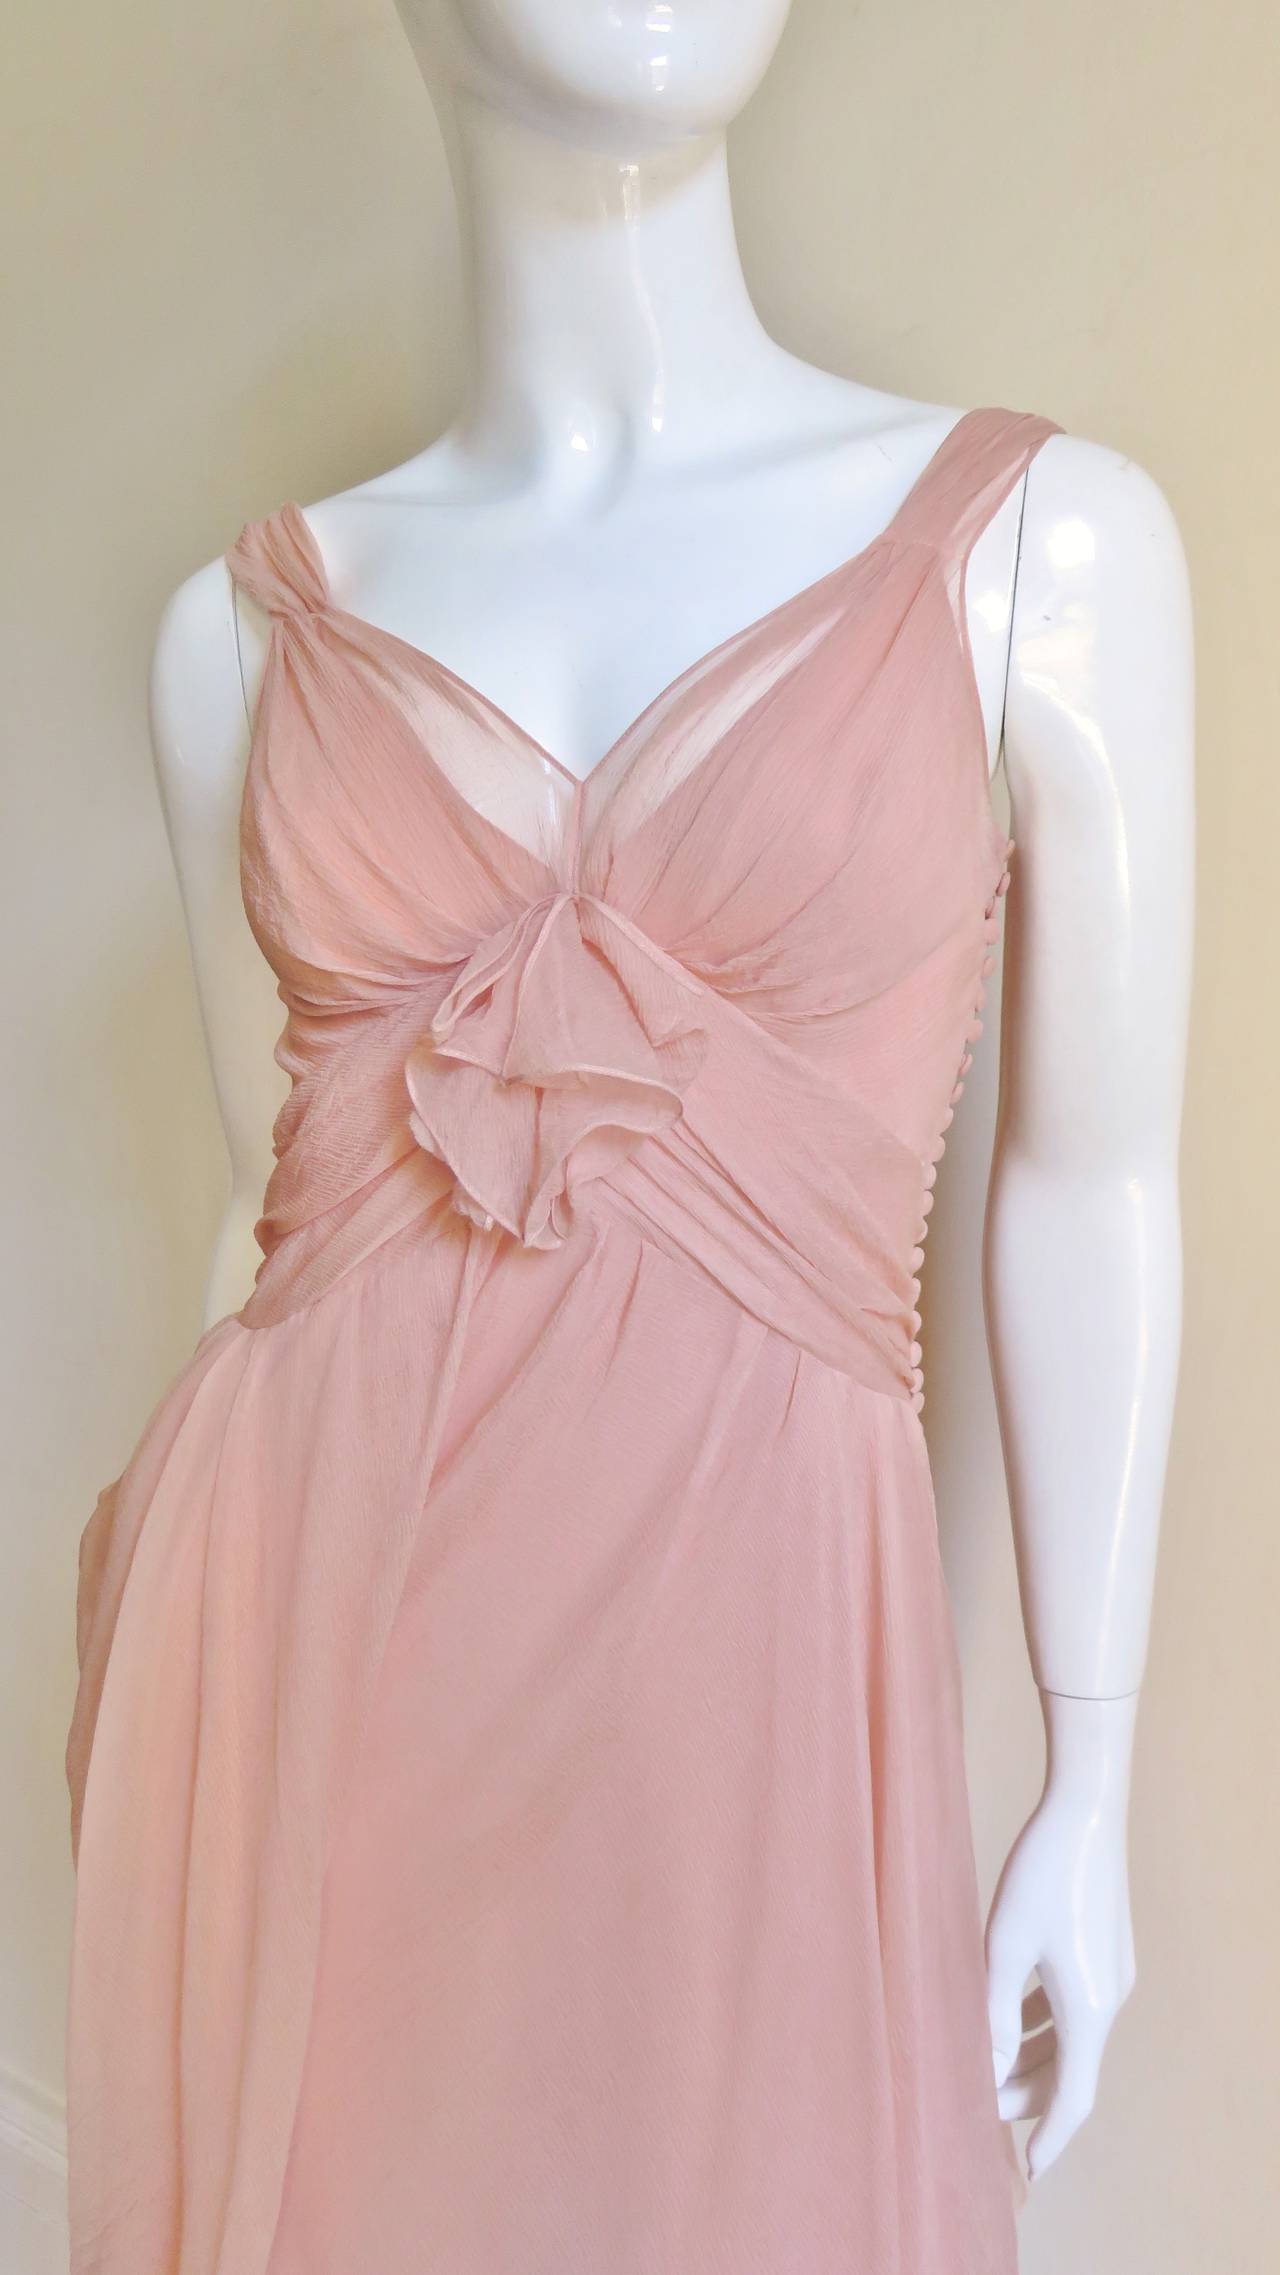 Ethereal Christian Dior Silk Dress For Sale at 1stdibs